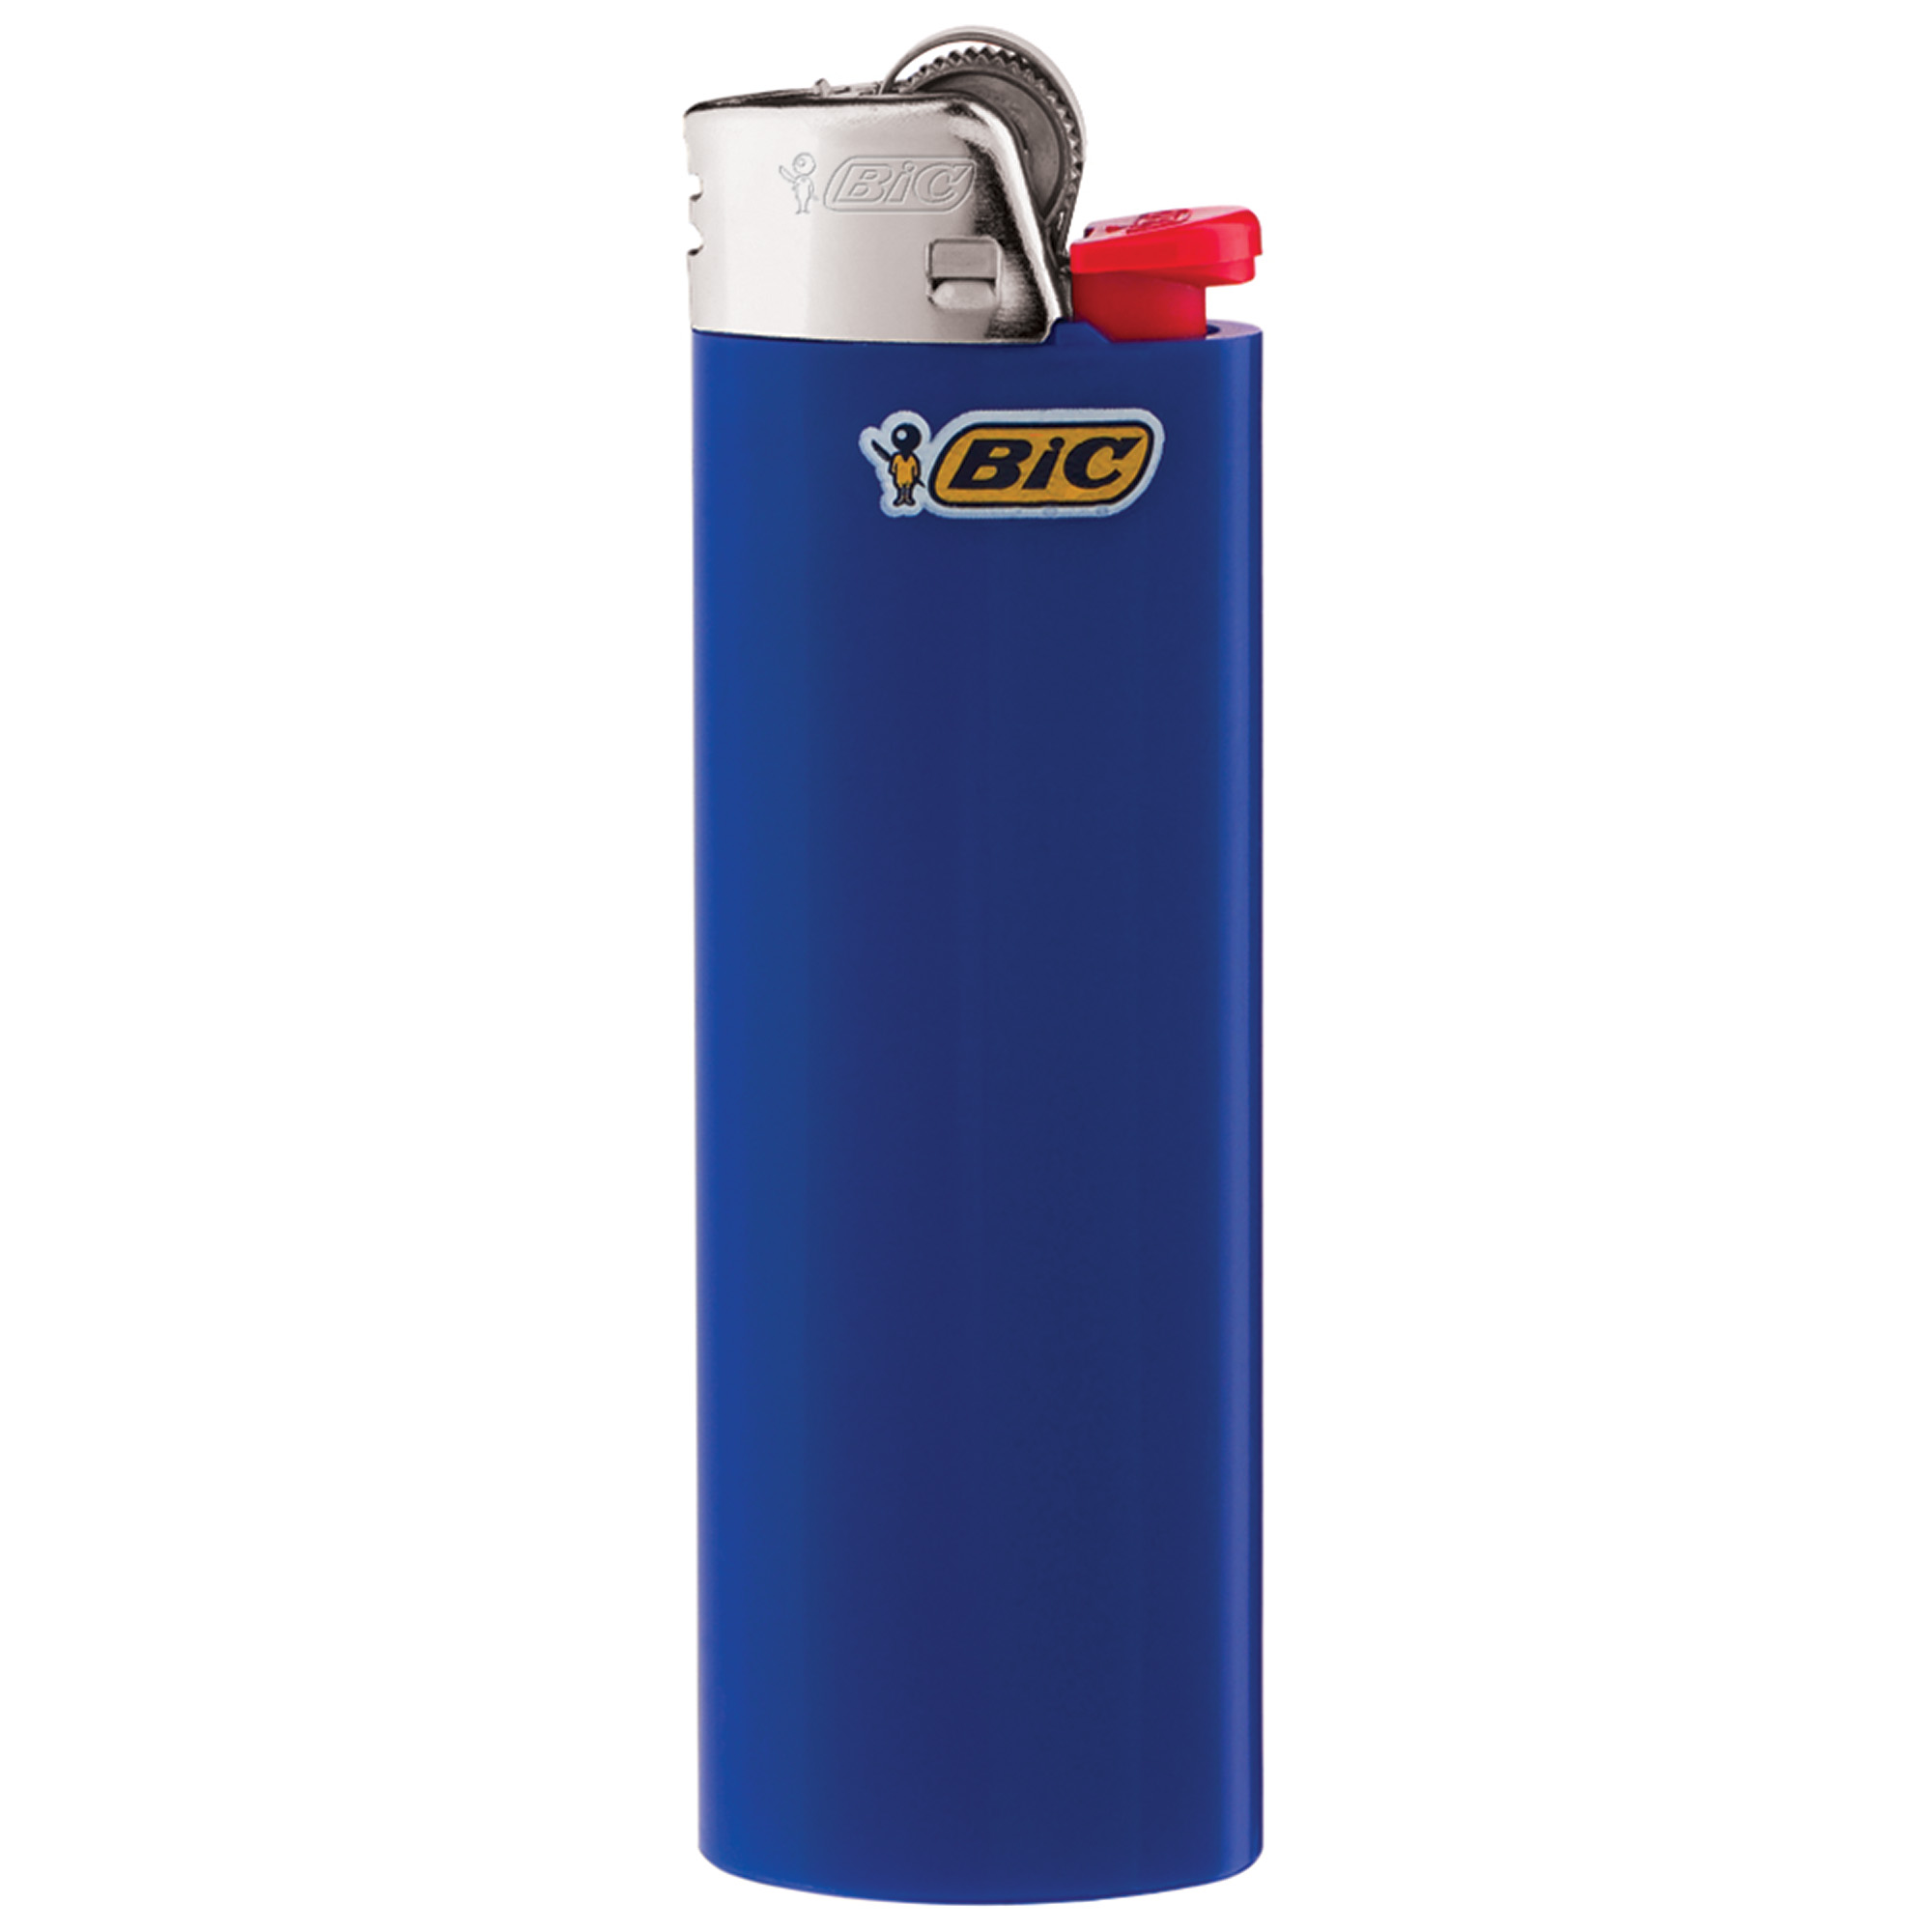 BIC Classic Pocket Lighter, Assorted Colors, 2 Pack - image 5 of 7